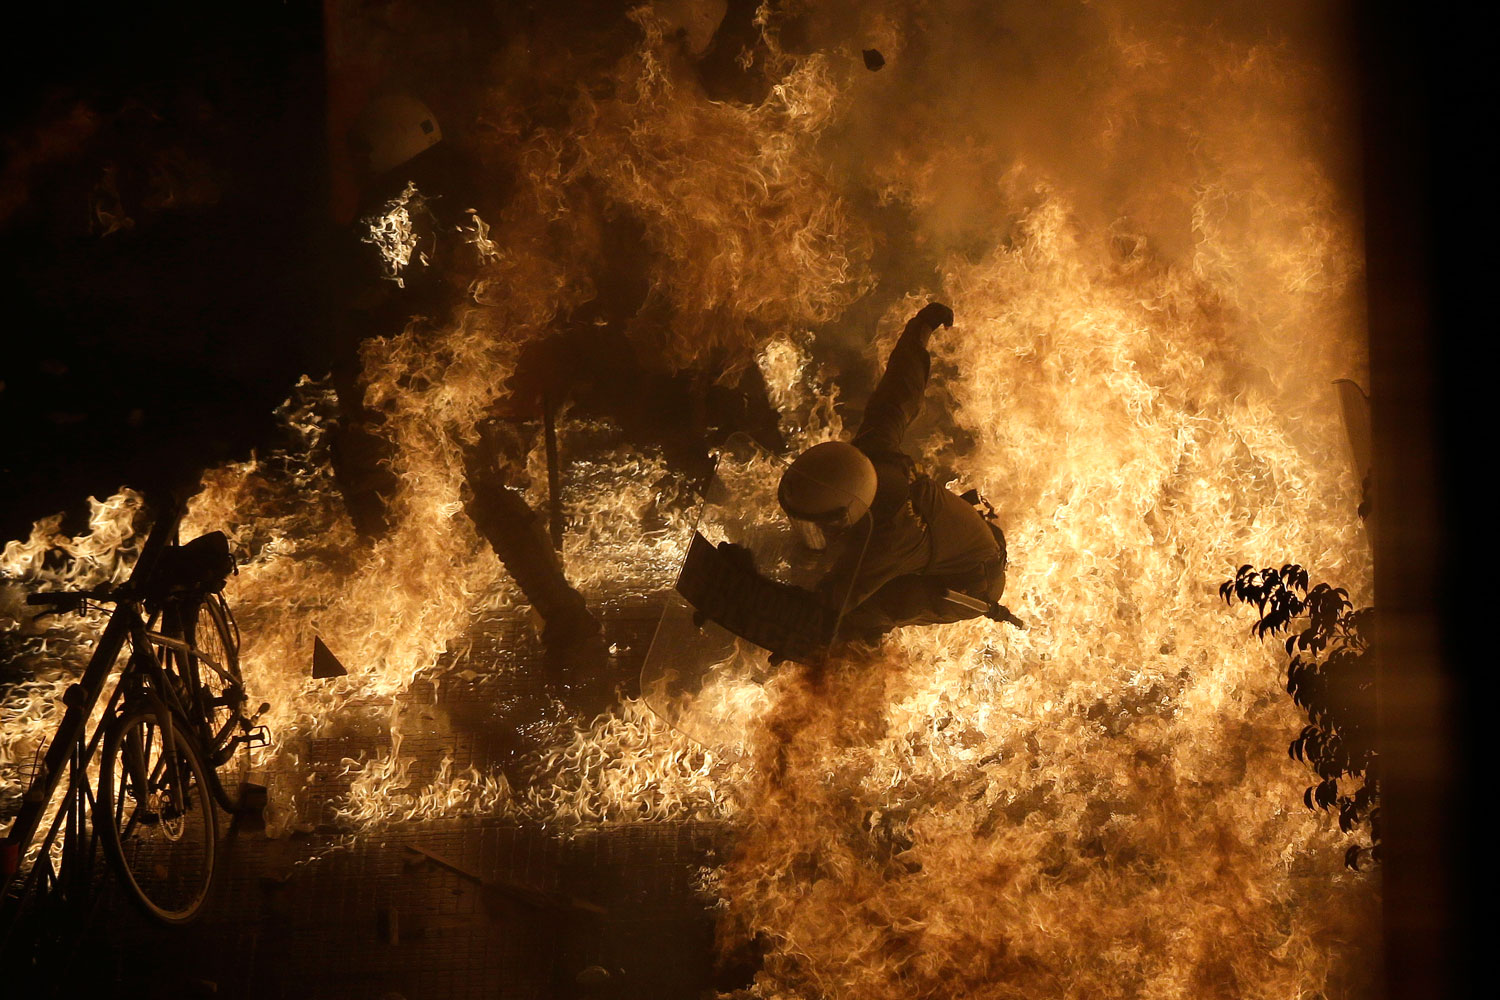 Image: Nov. 7, 2012. A riot police officer is engulfed by petrol bomb flames thrown by protesters in front of the parliament during clashes in Athens.